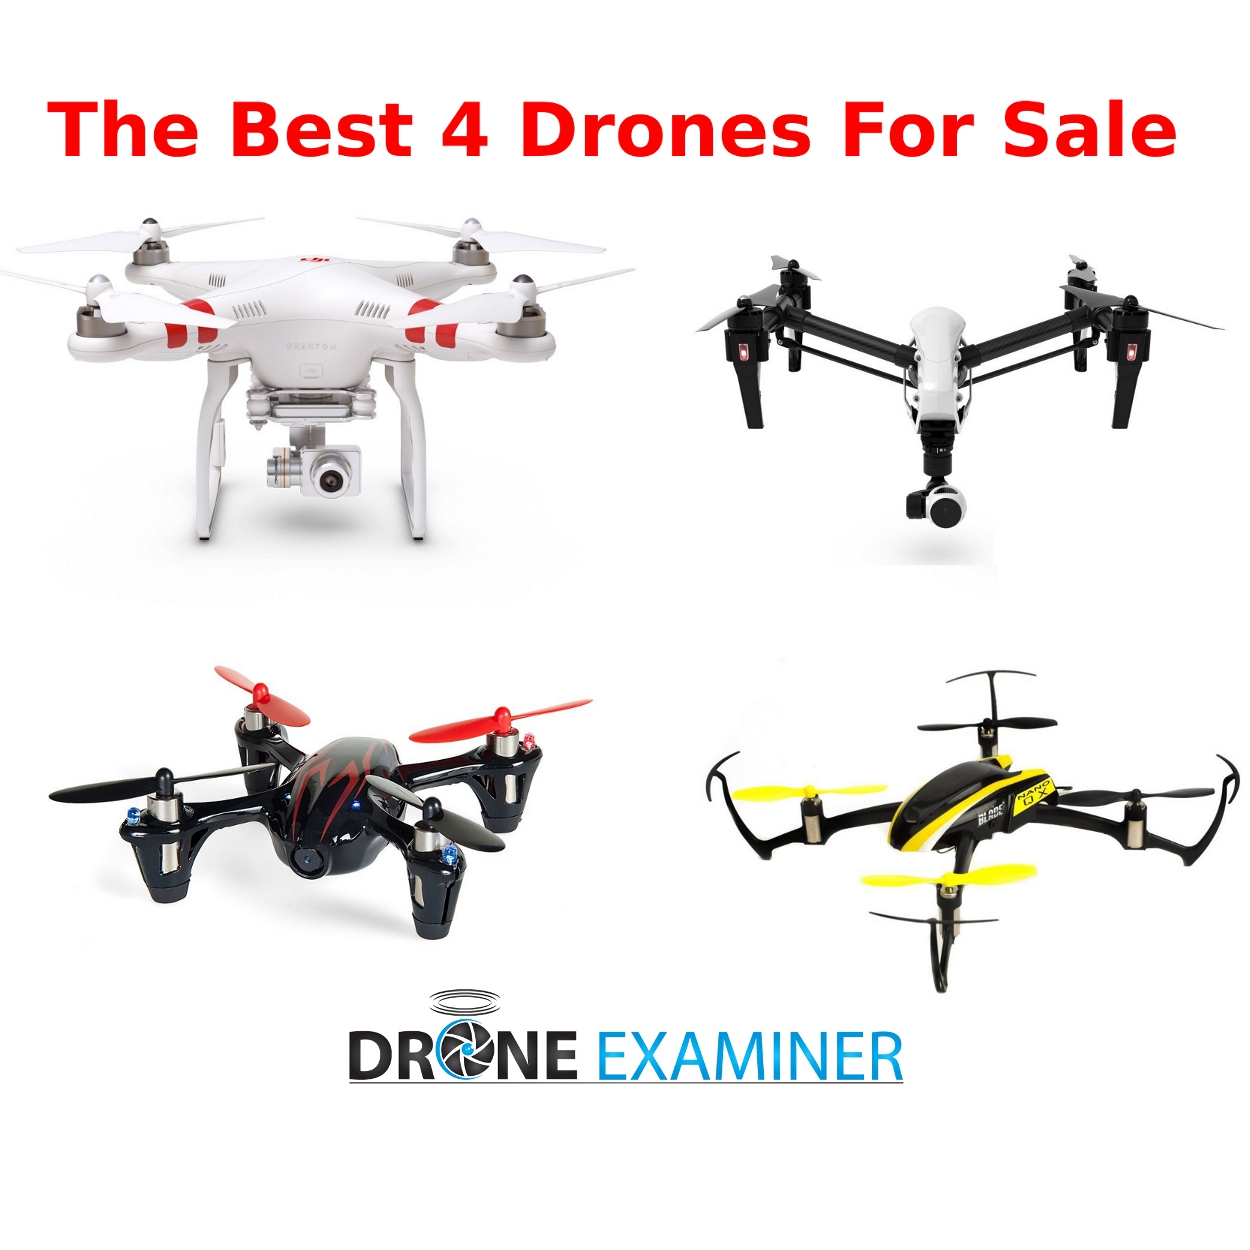 What Are the Best Drones For Sale?